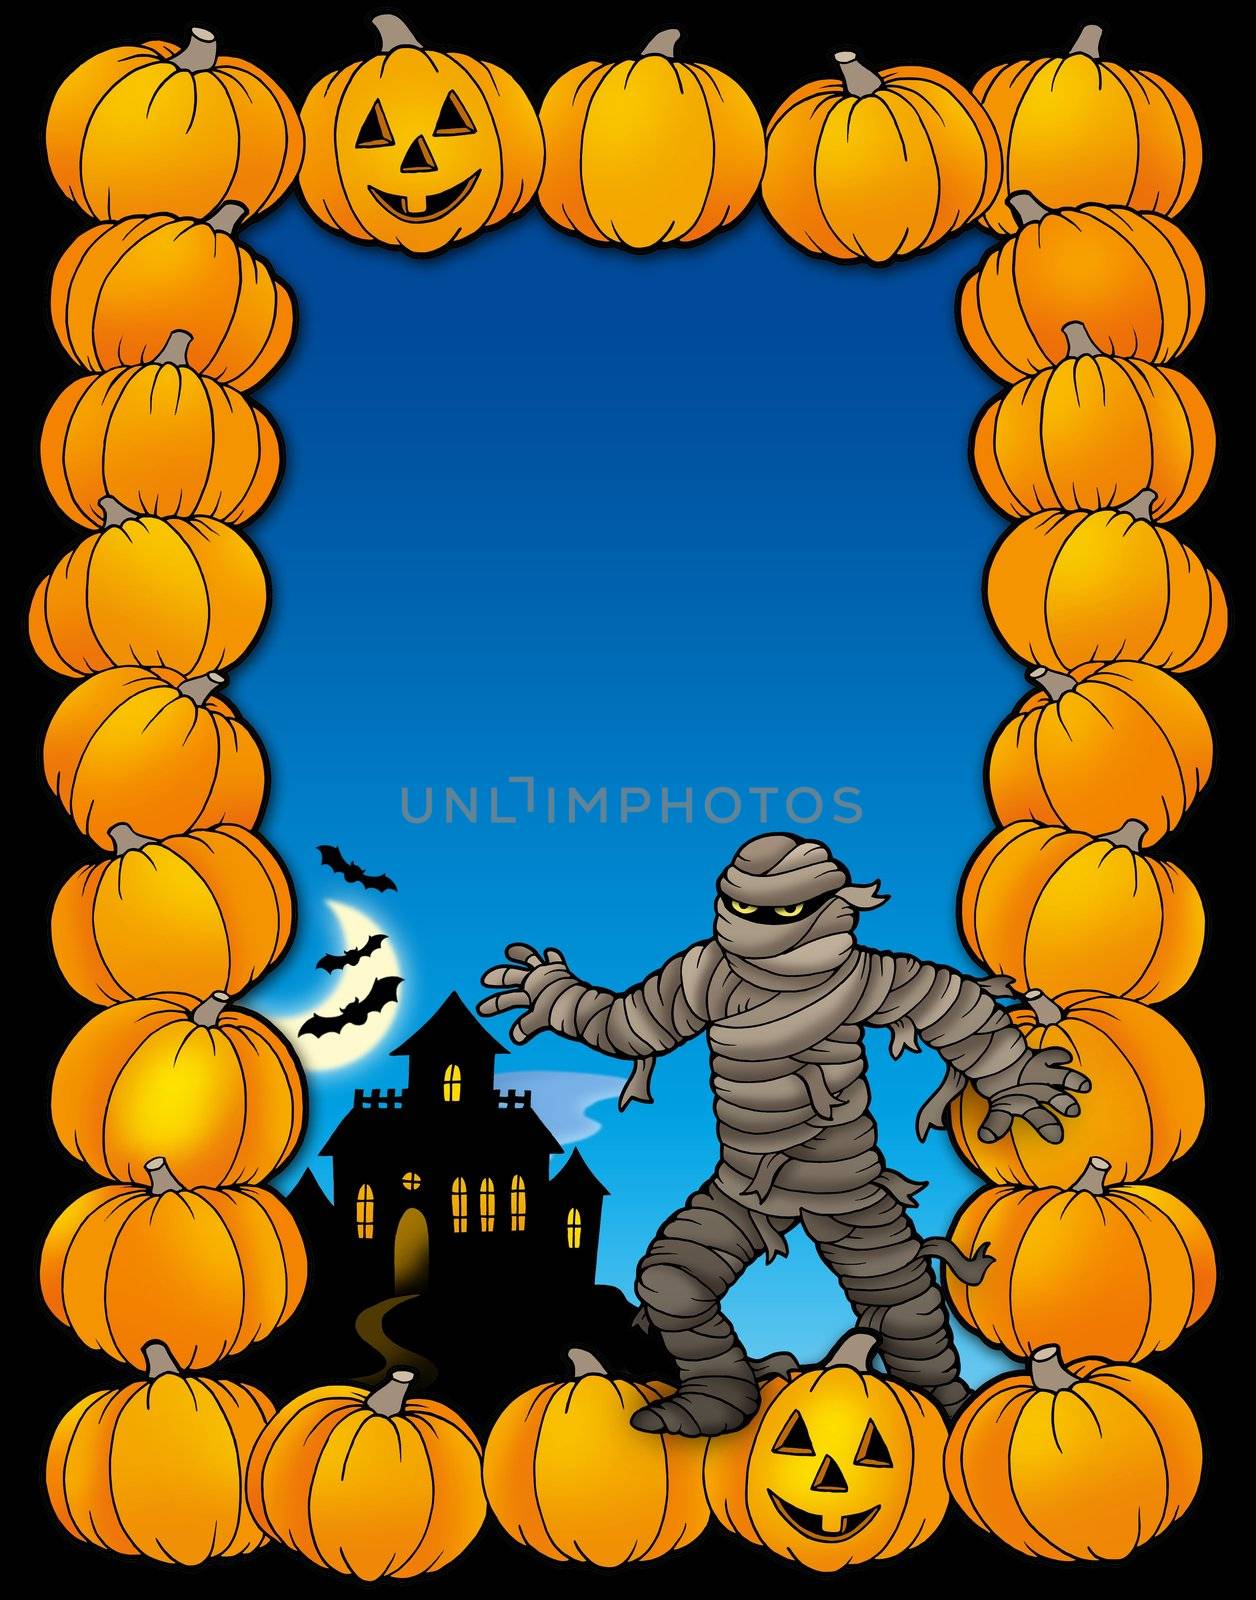 Halloween frame with mummy - color illustration.